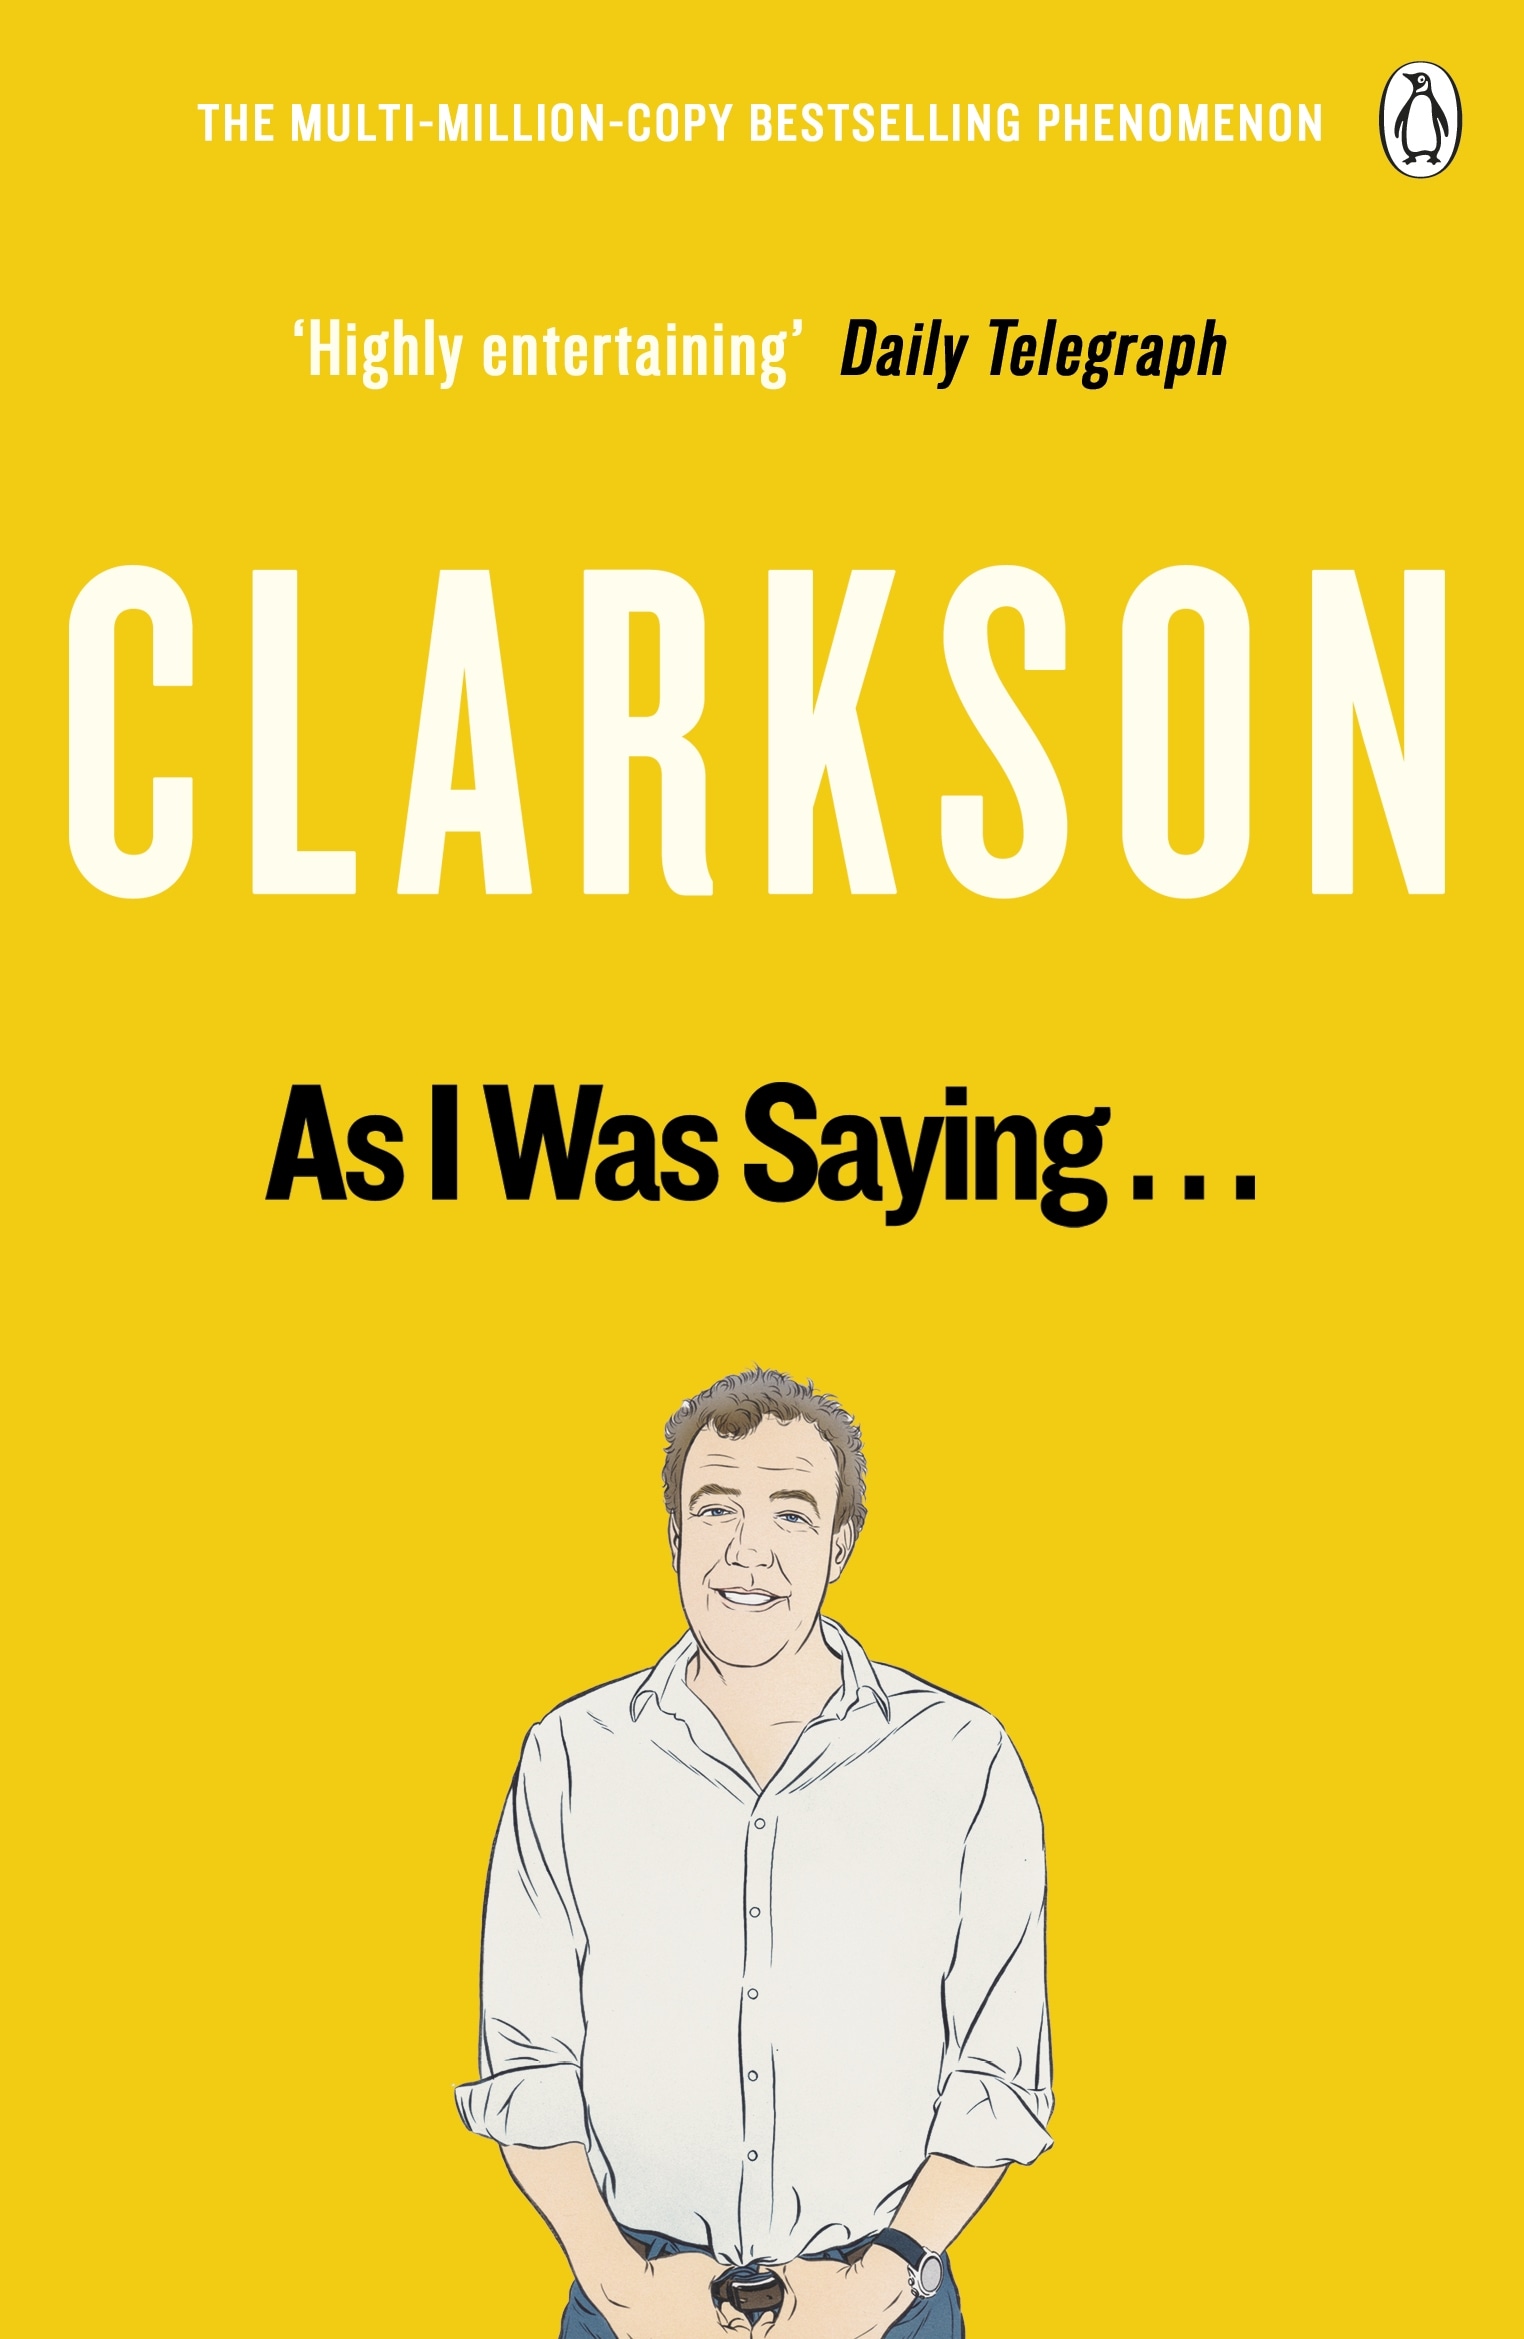 Book “As I Was Saying . . .” by Jeremy Clarkson